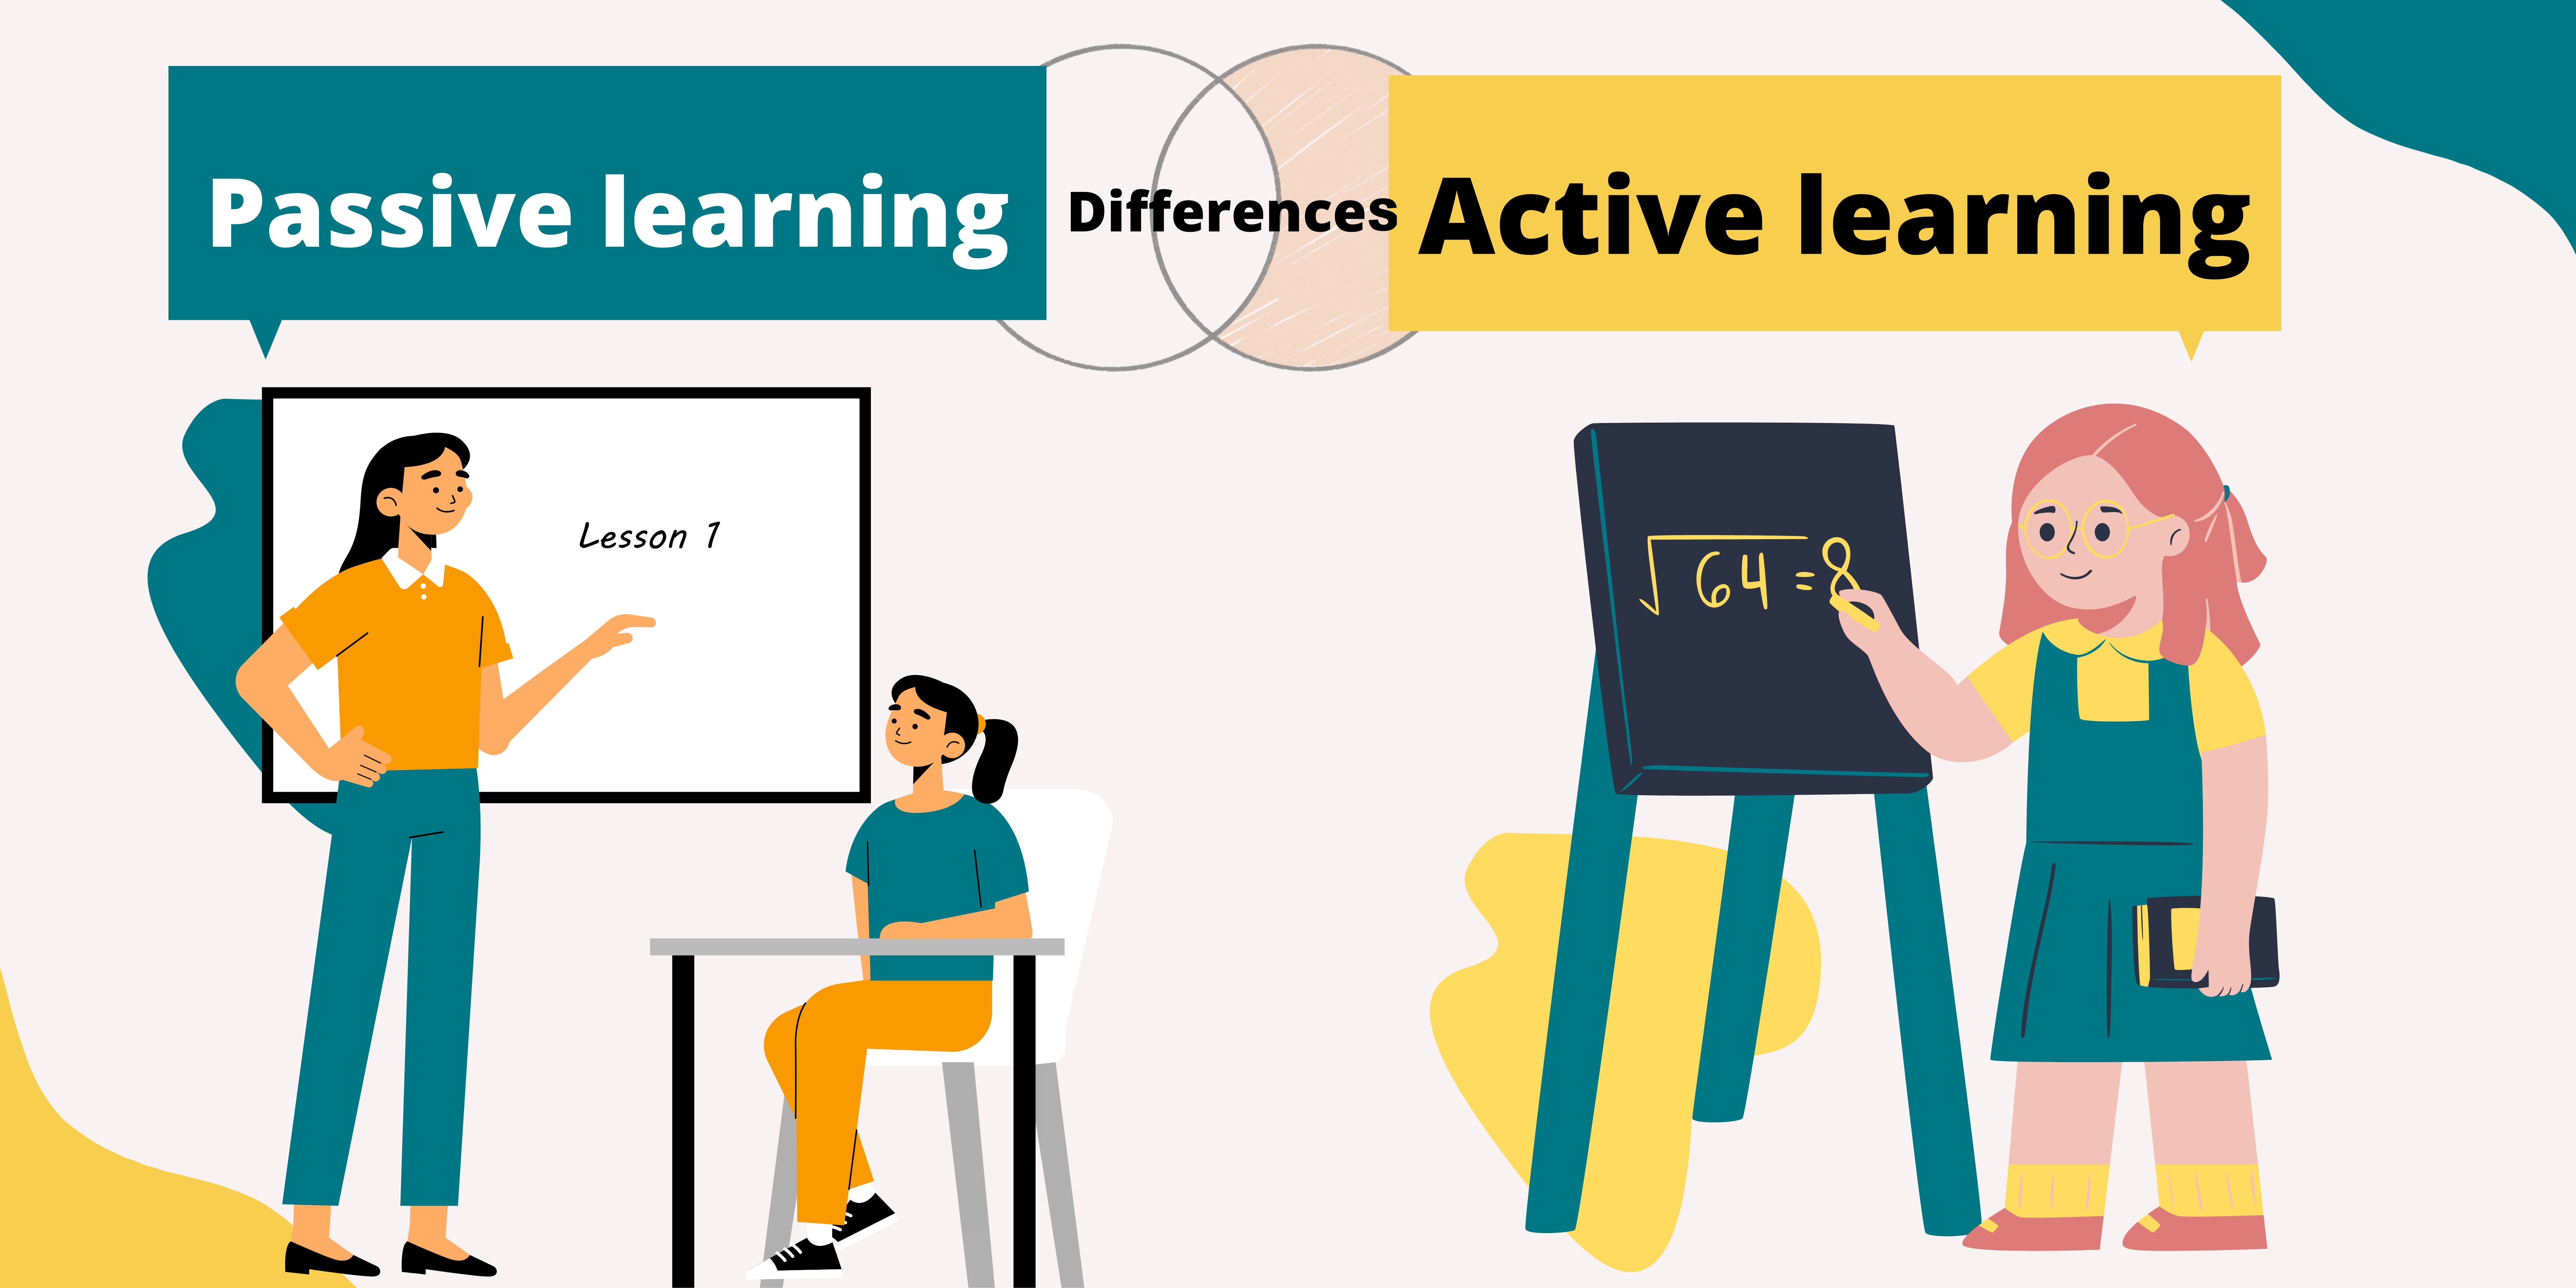 Active vs. Passive Learning: What are the Differences?